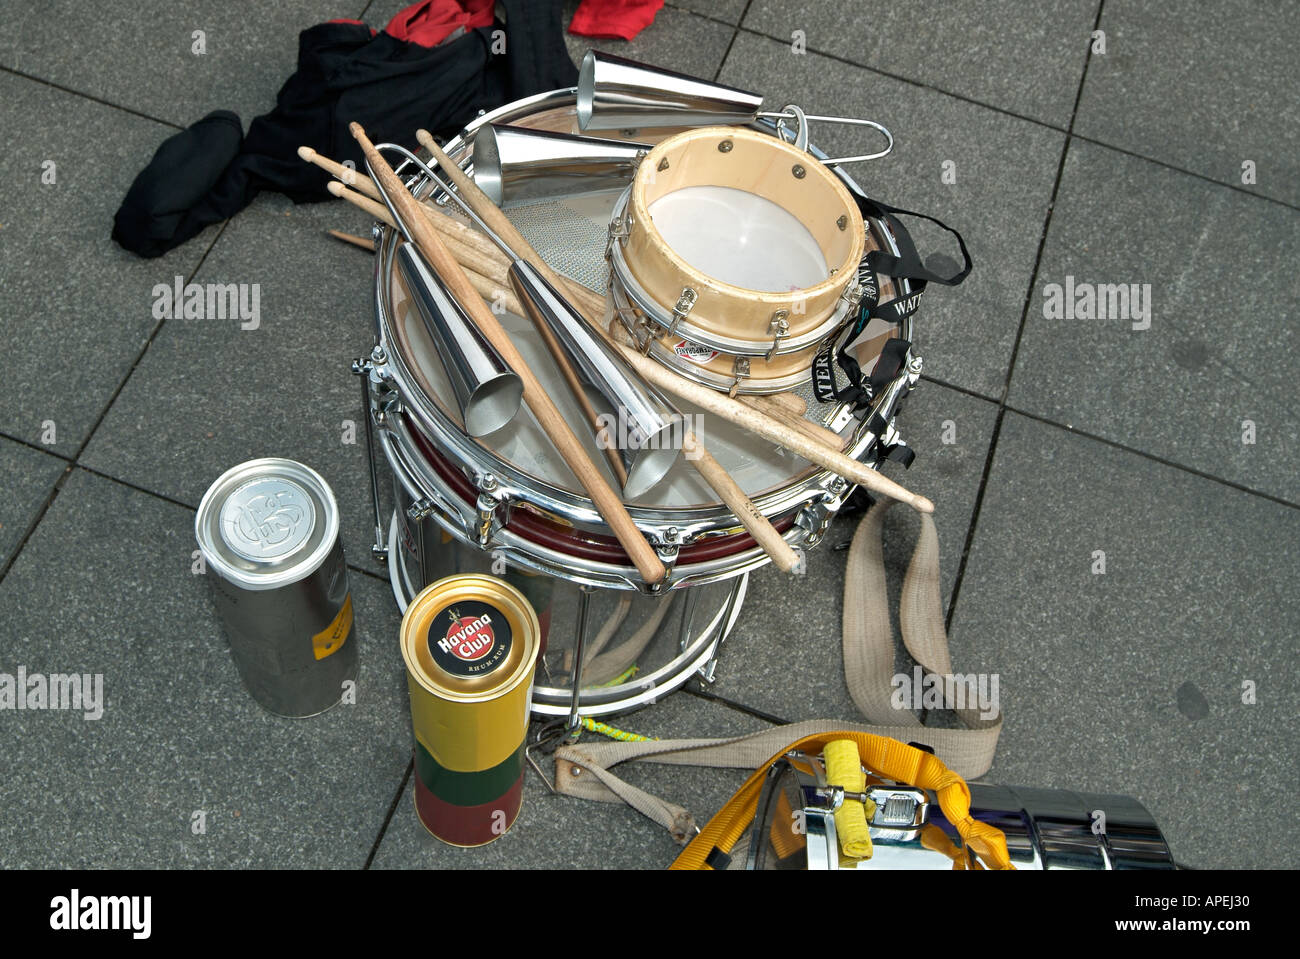 Drums and Other Percussion Instruments Used by a Street Performer Stock Photo